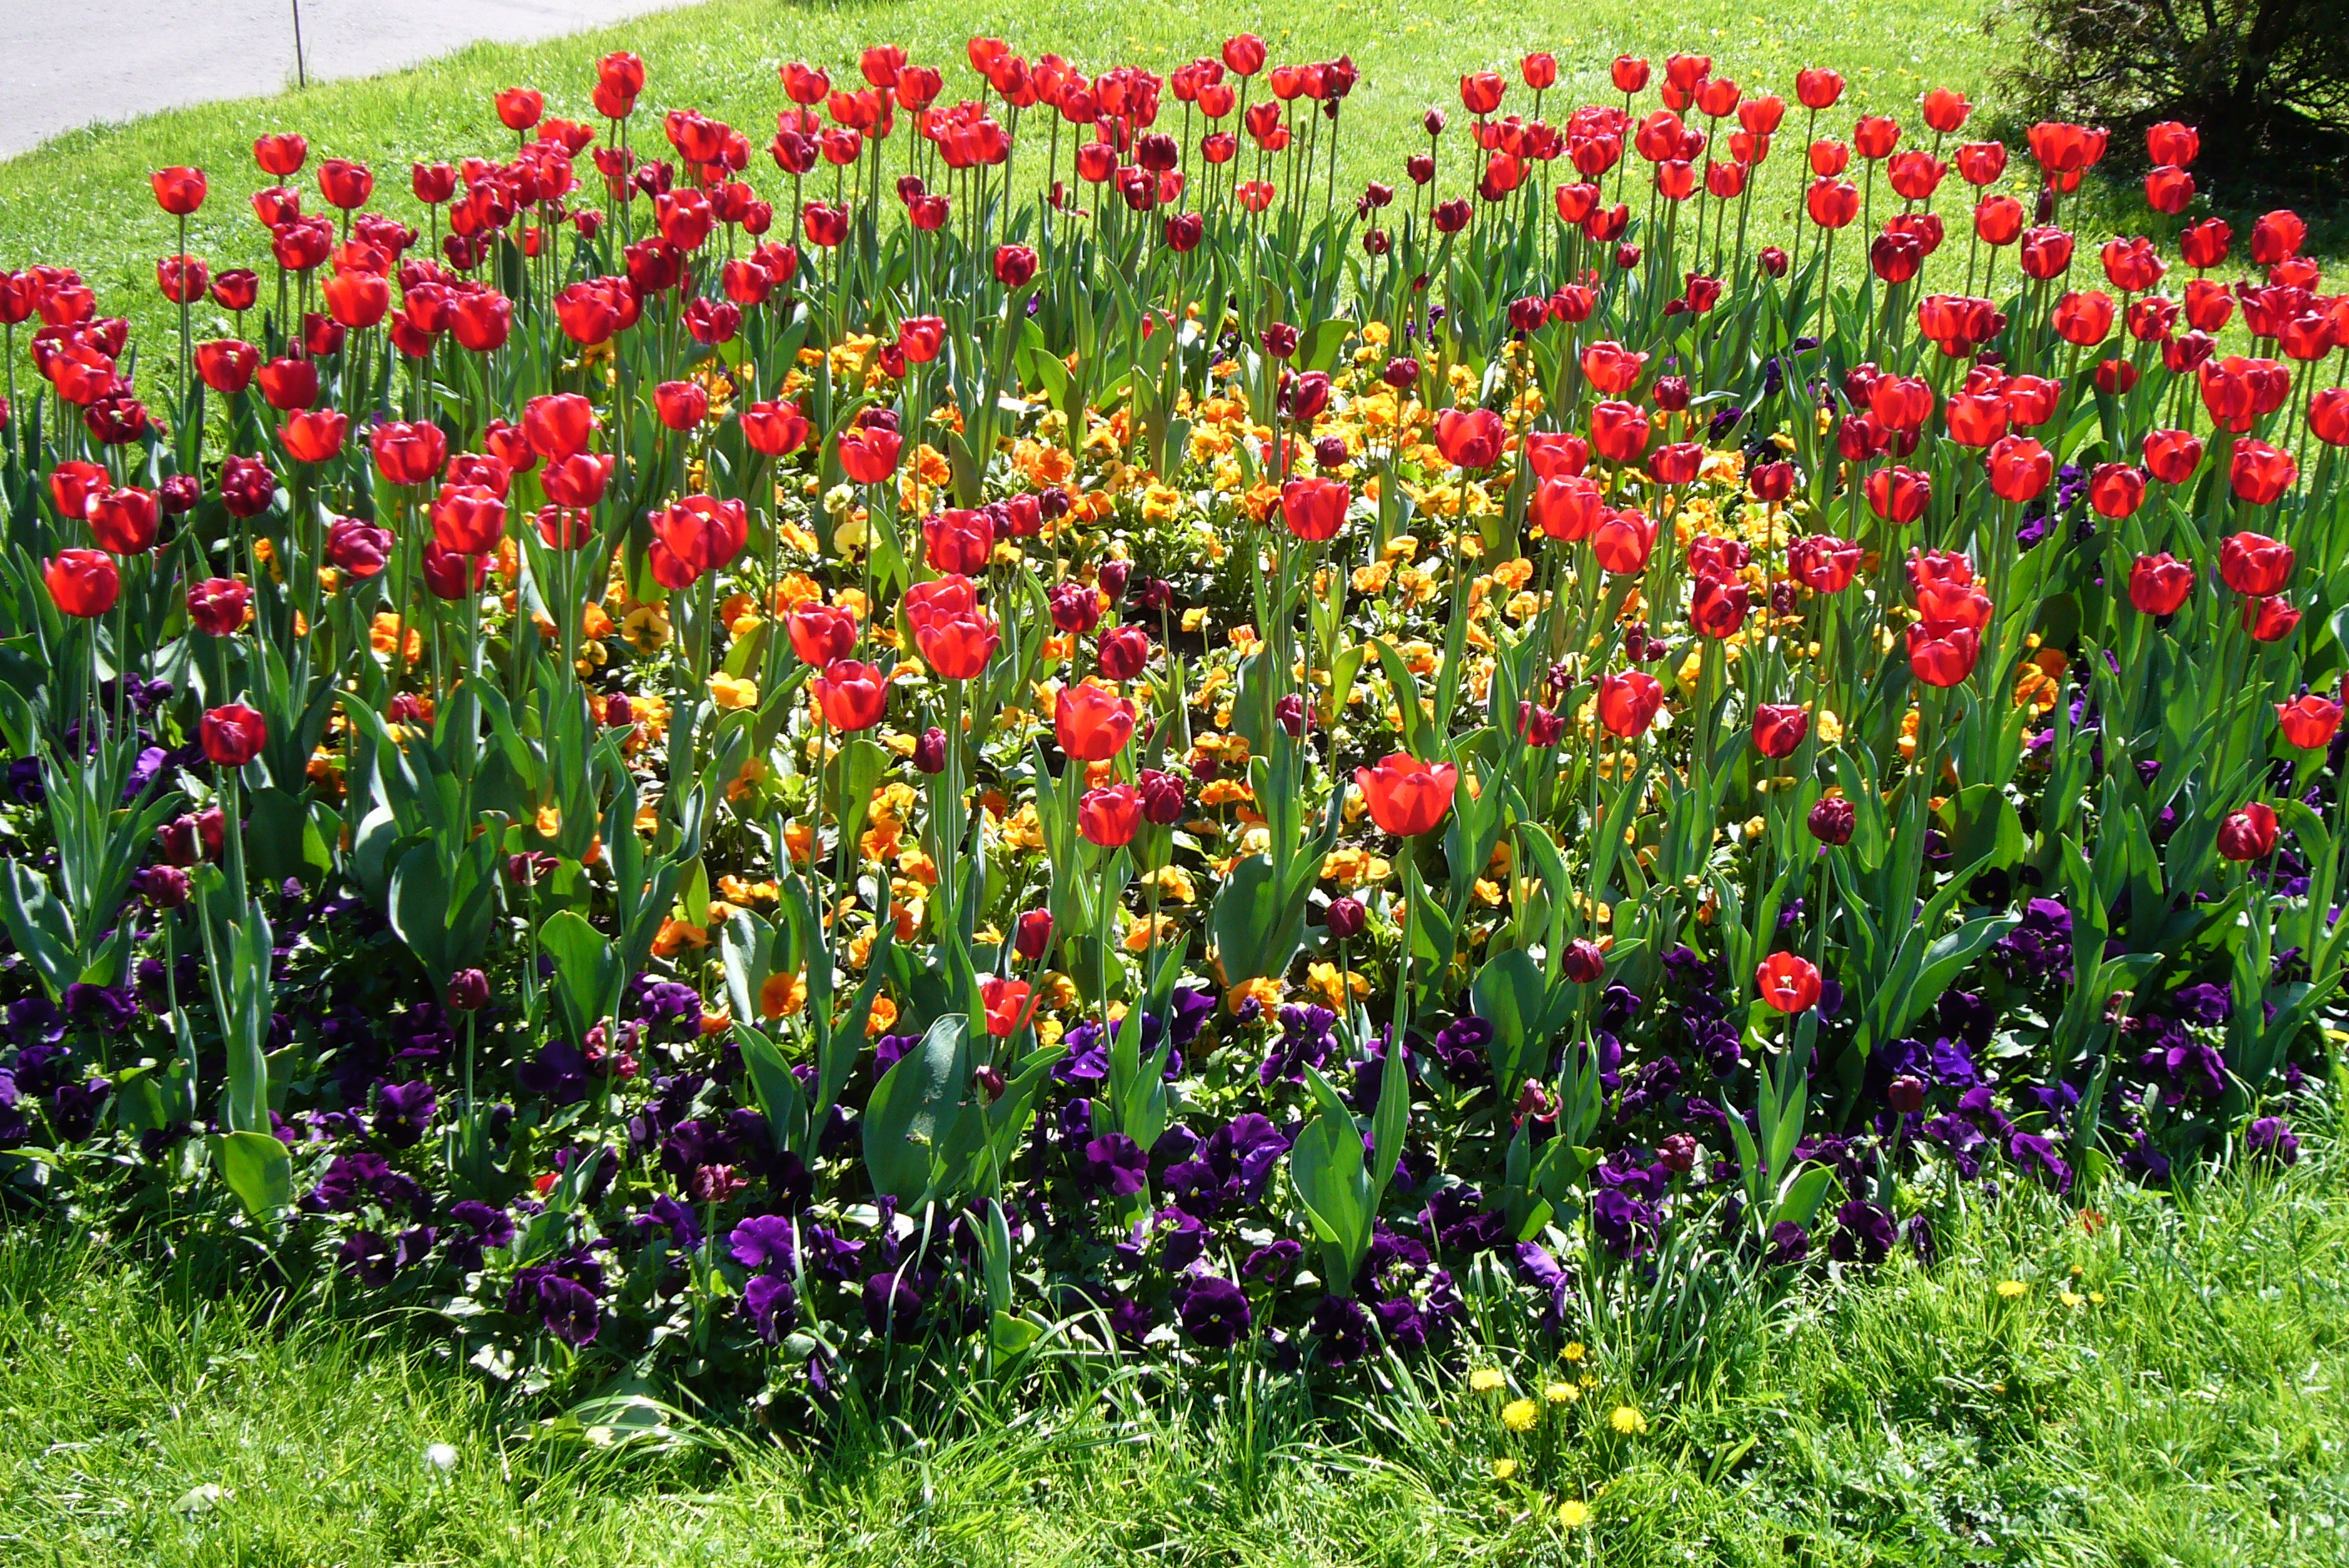 File:Flower-bed-Moscow.JPG - Wikimedia Commons